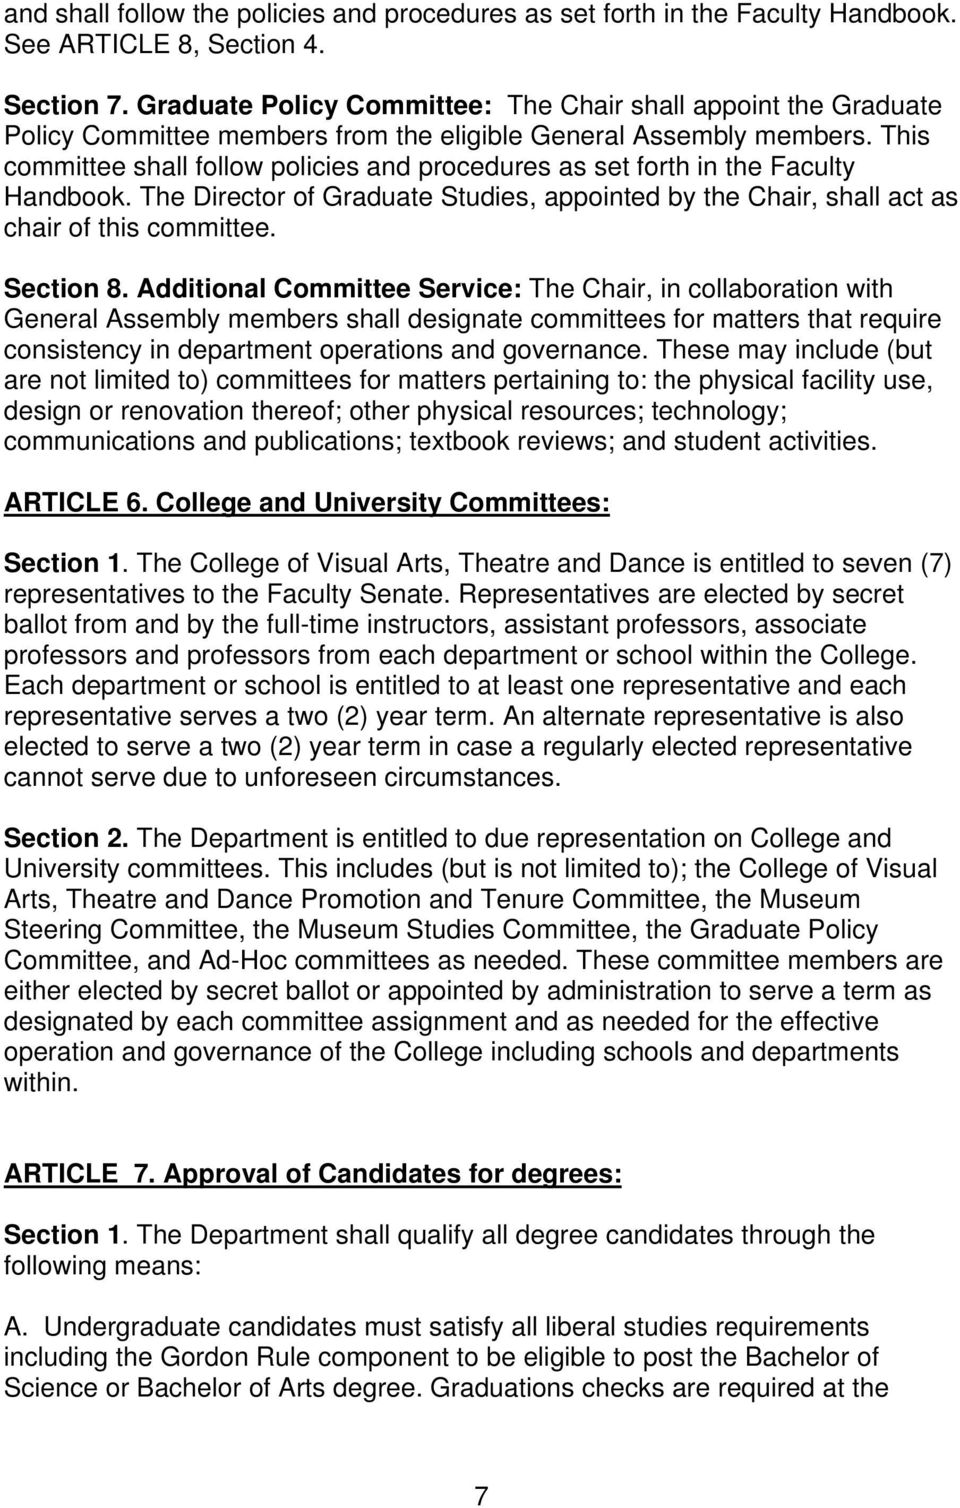 This committee shall follow policies and procedures as set forth in the Faculty Handbook. The Director of Graduate Studies, appointed by the Chair, shall act as chair of this committee. Section 8.